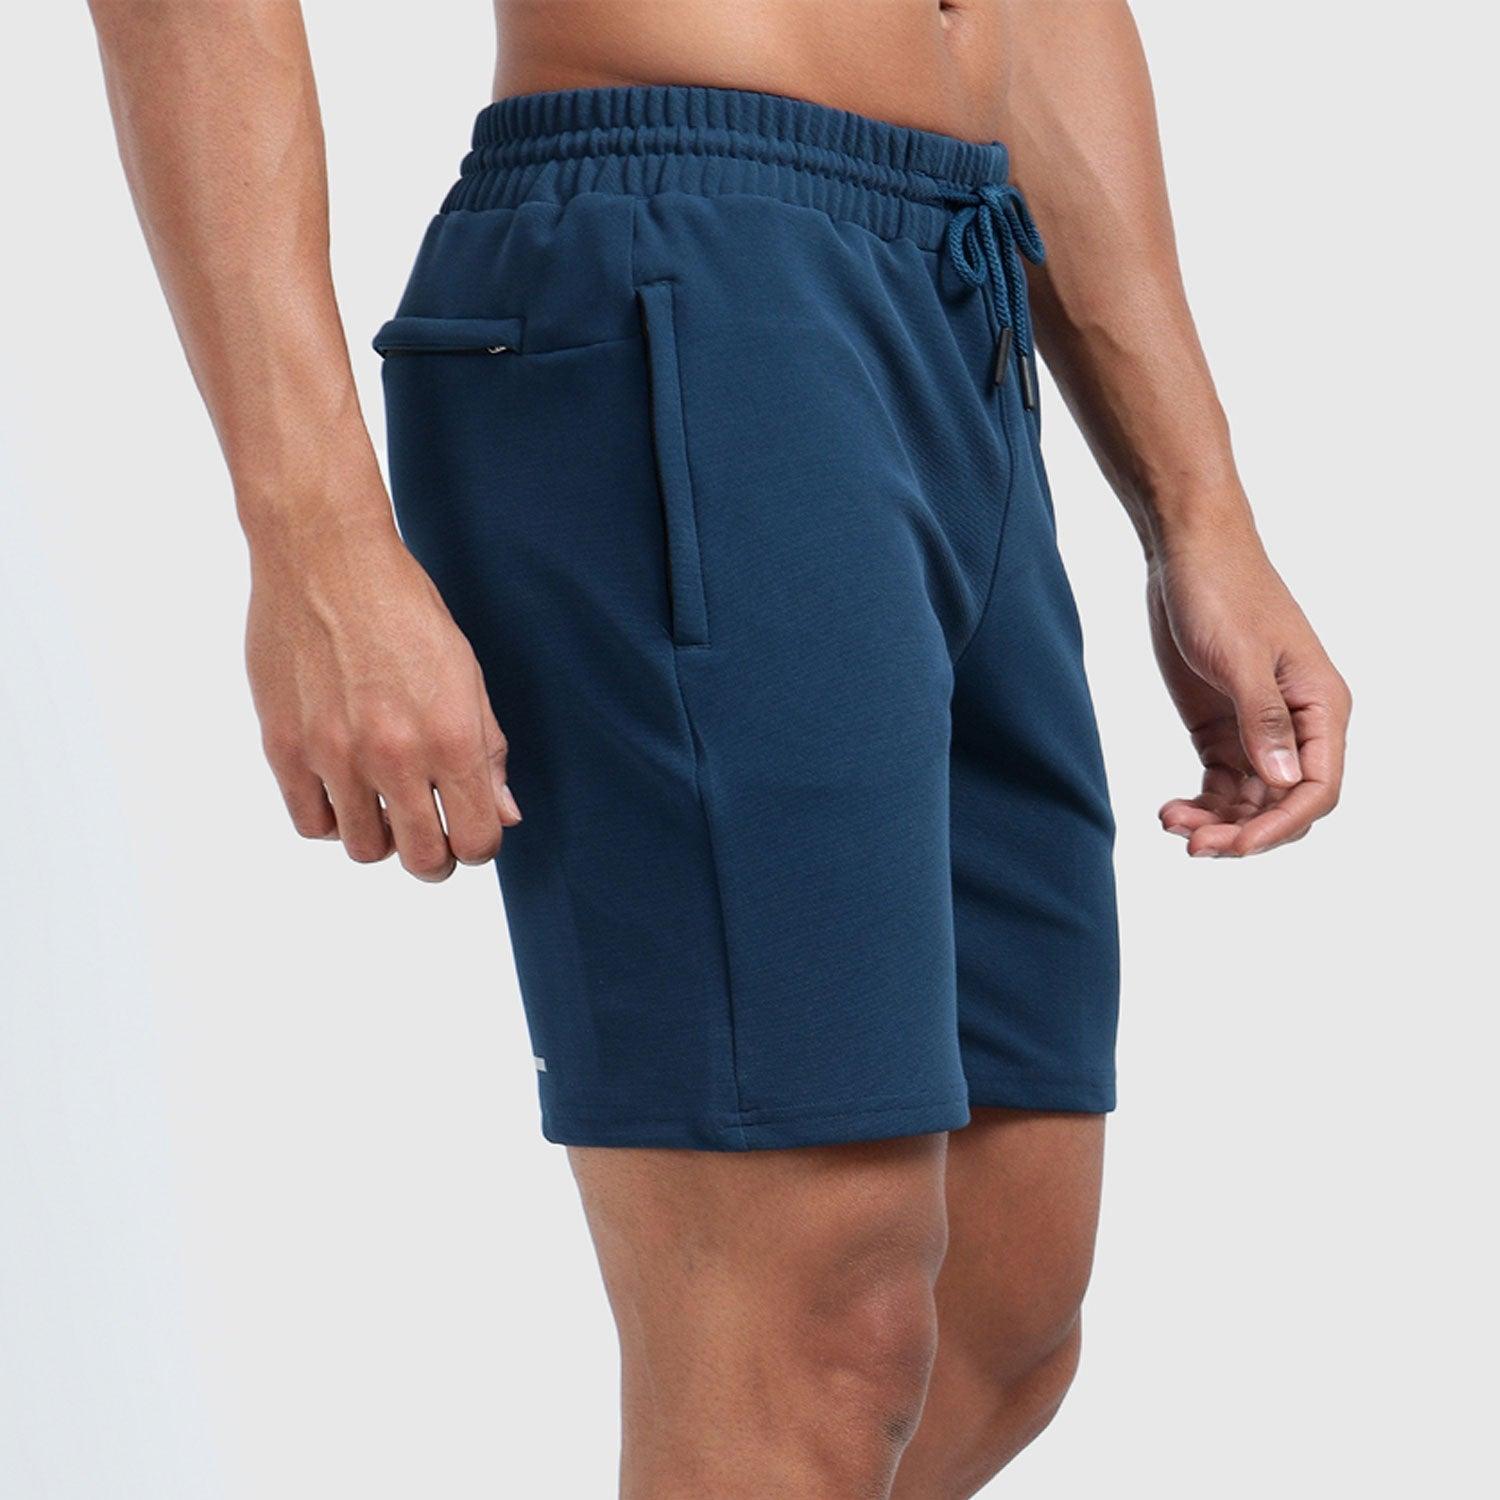 Denmonk's fashionable Trekready regal blue shorts for men will boost your level of gym fitness.